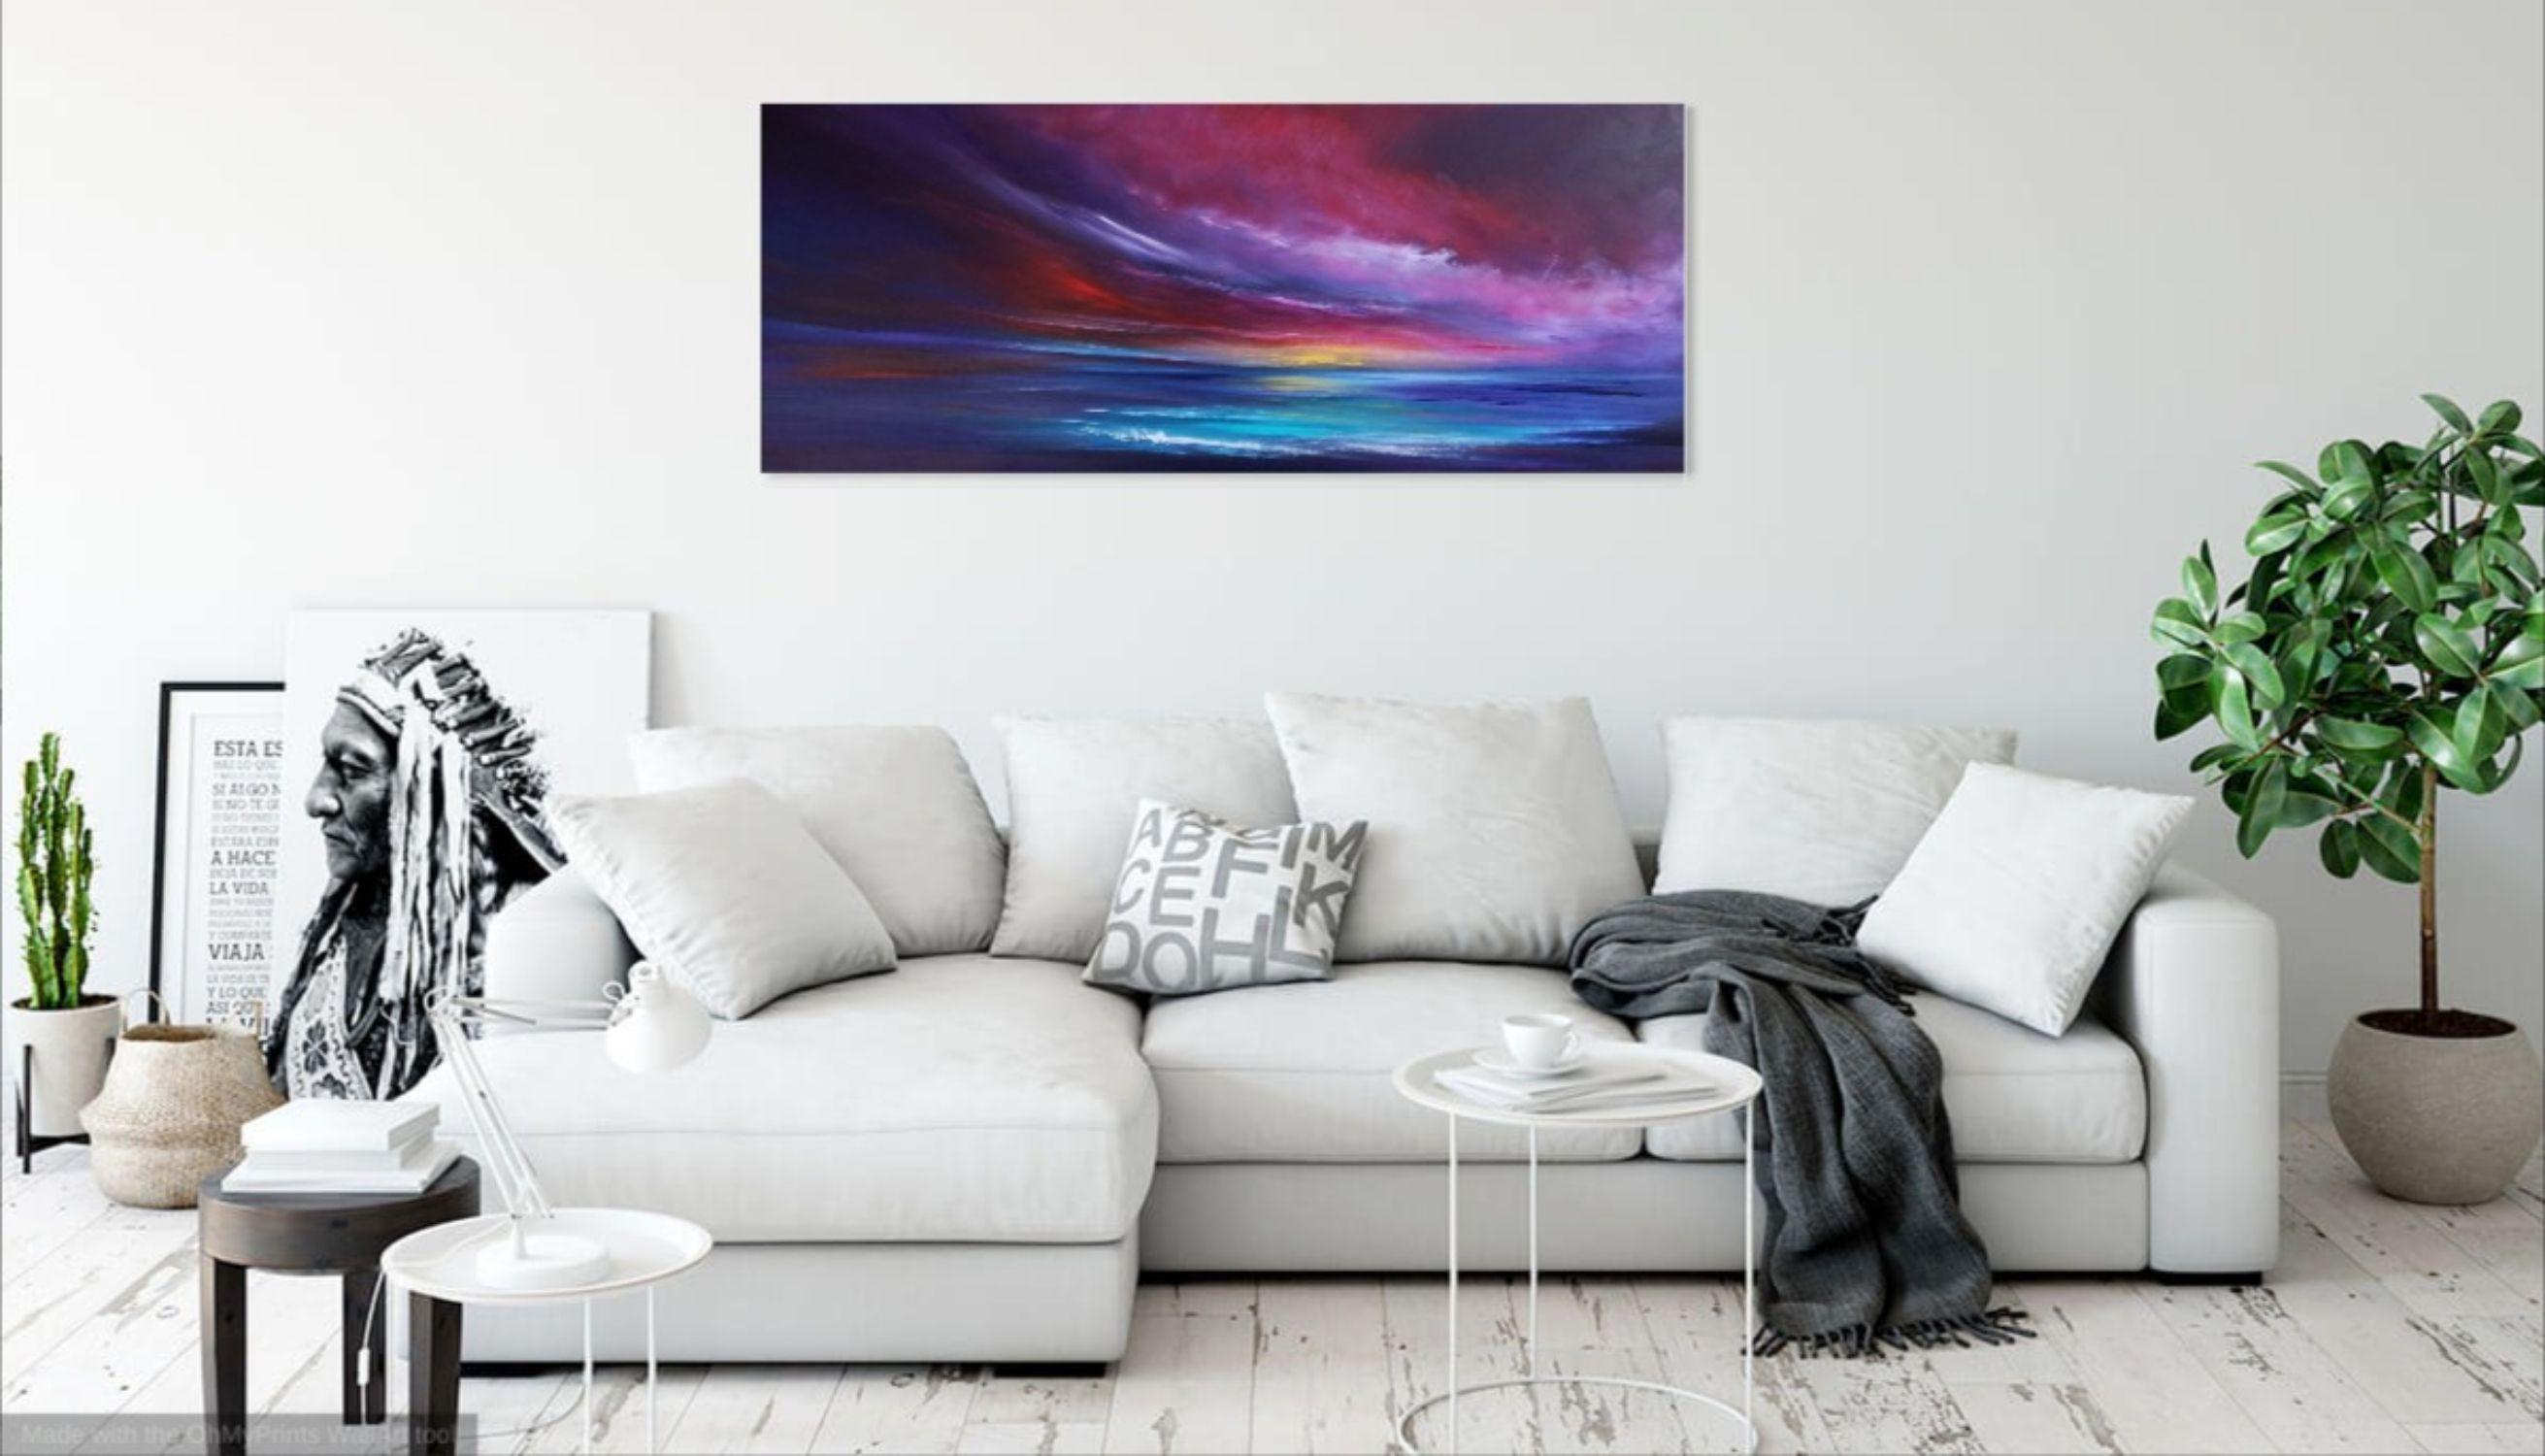 Incandescence, Panoramic Seascape, Painting, Acrylic on Canvas 1